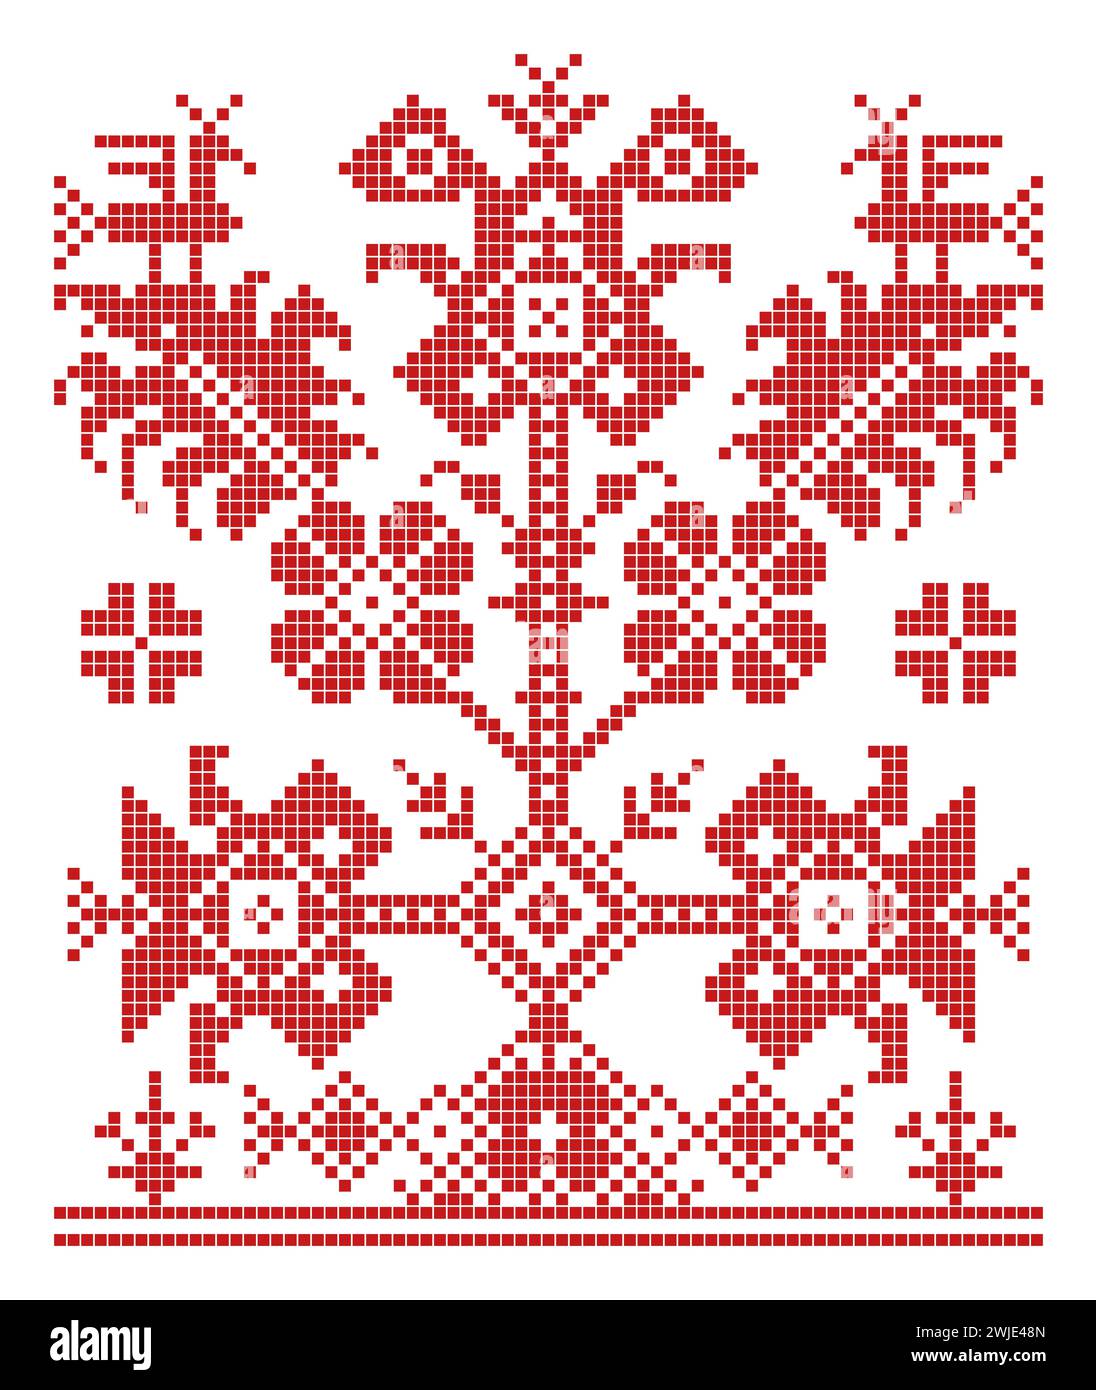 World Tree, slavic embroidery ornament and pattern. Symbol of a colossal tree which connects heavens, terrestrial world and with roots the underworld. Stock Photo